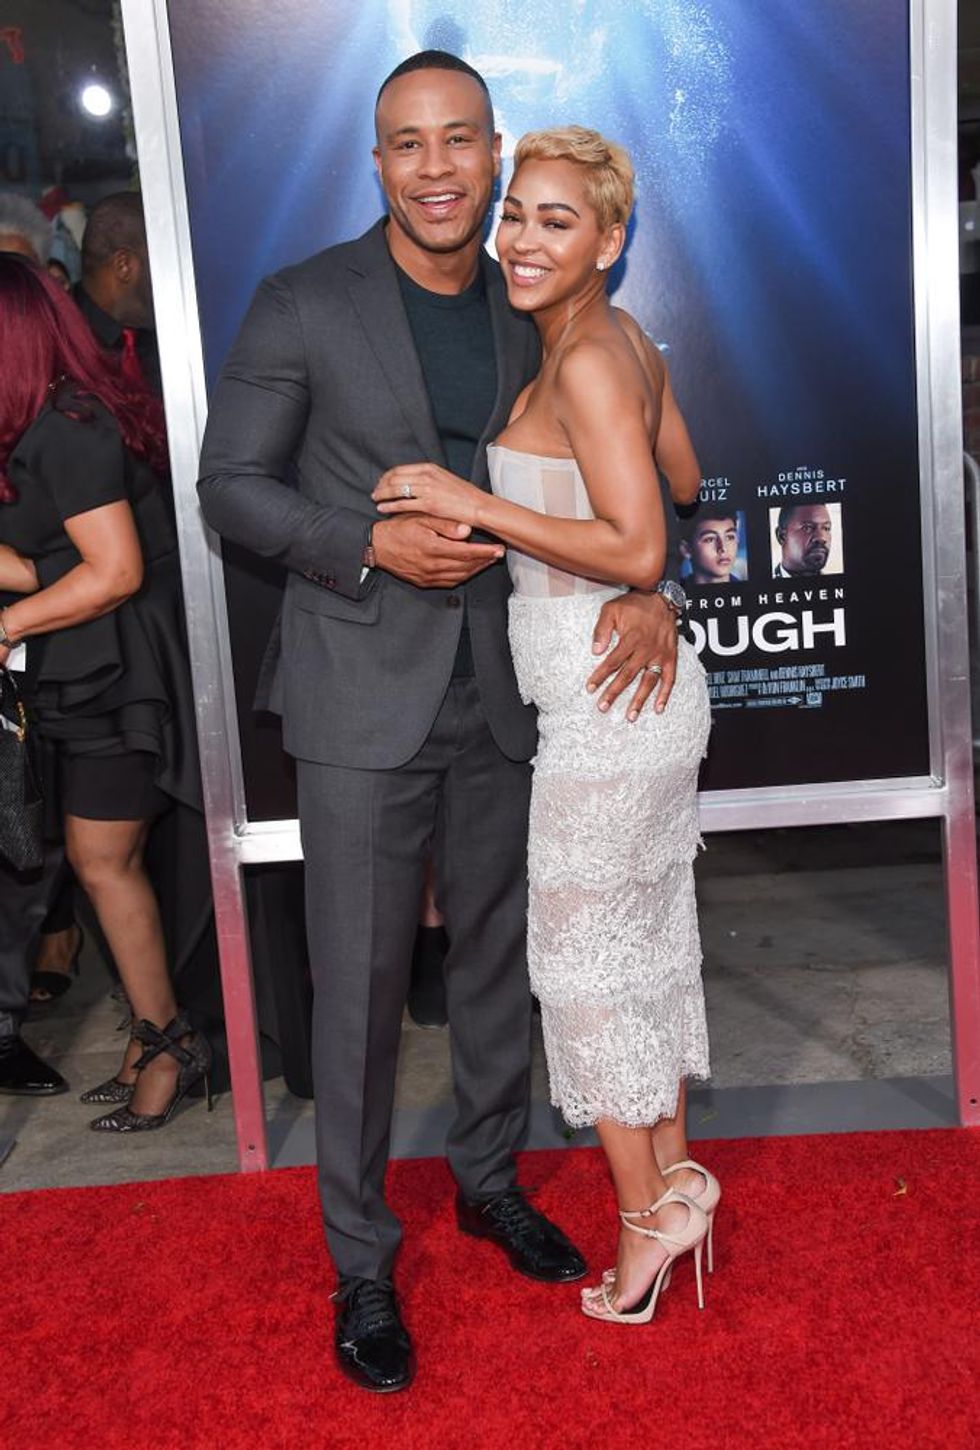 Meagan Good Gets Real About Freezing Her Eggs While Deciding If She Wants Kids